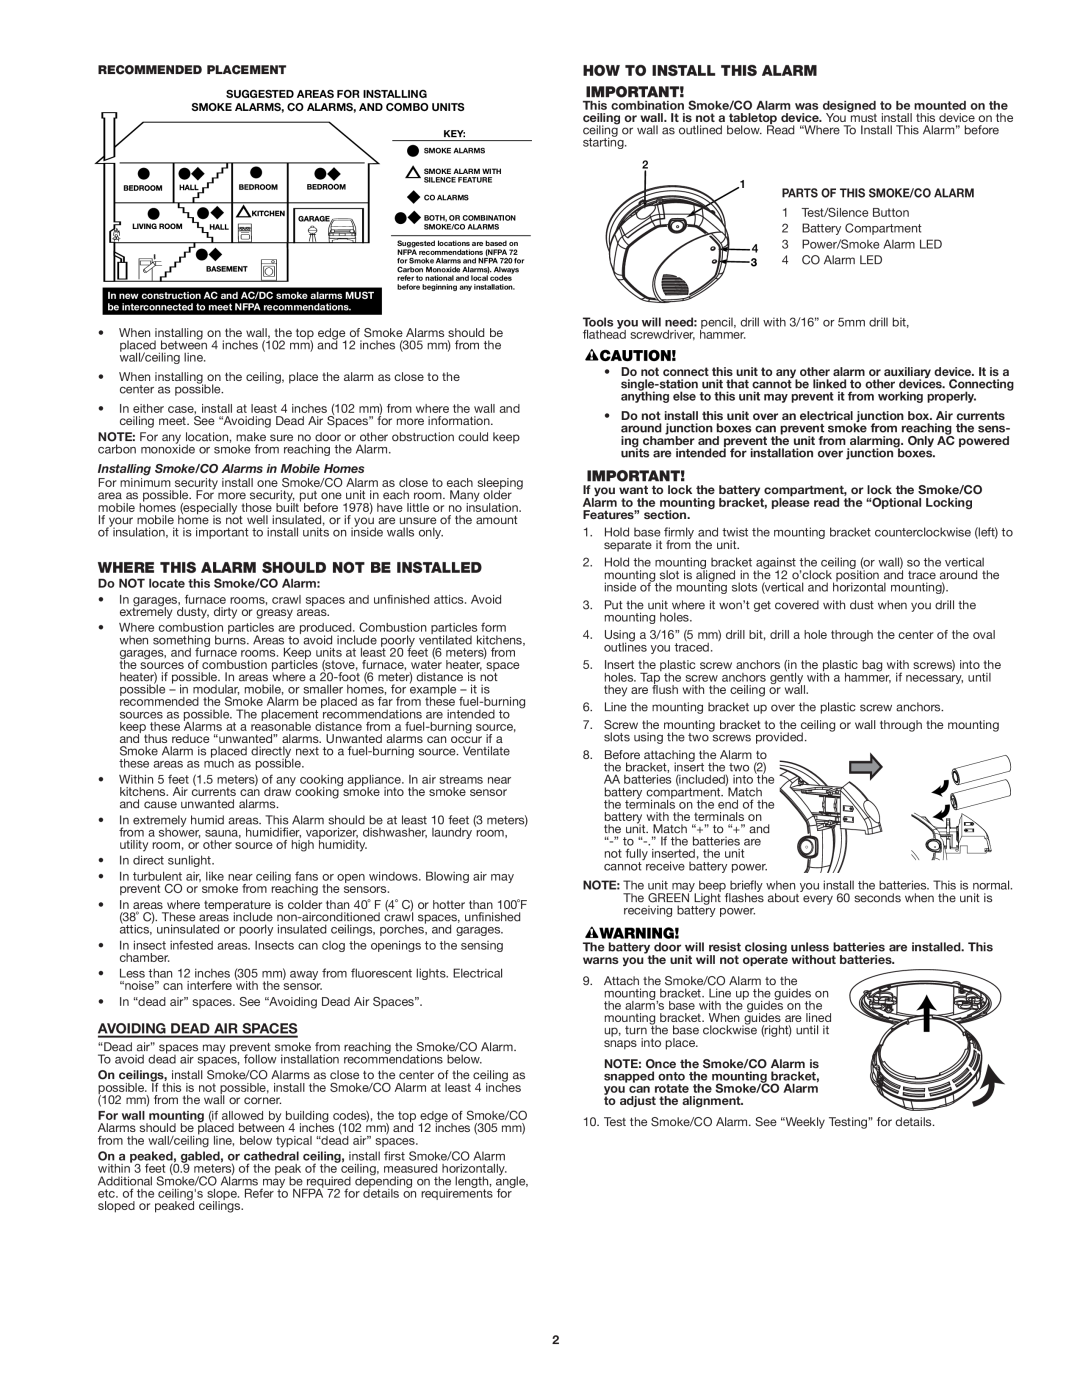 First Alert SCO5 user manual Where This Alarm Should Not Be Installed, Avoiding Dead Air Spaces, How To Install This Alarm 